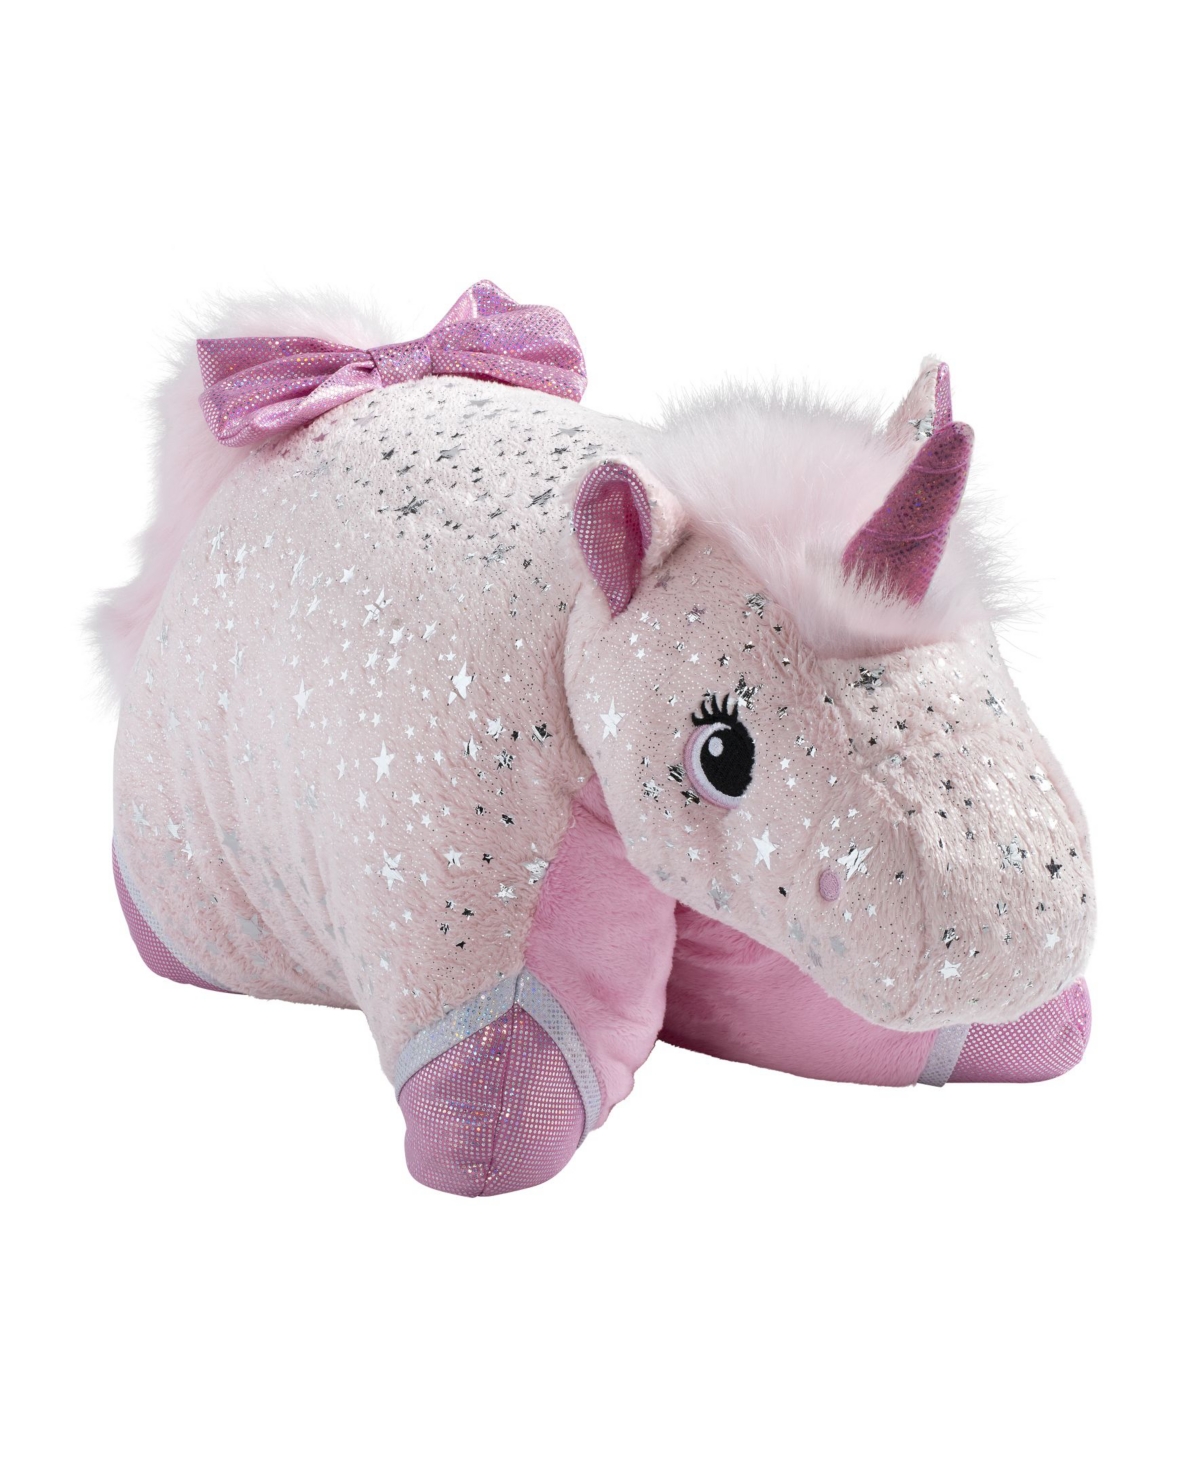 Pillow Pets Kids' Signature Sparkly Unicorn Stuffed Animal Plush Toy In Pink